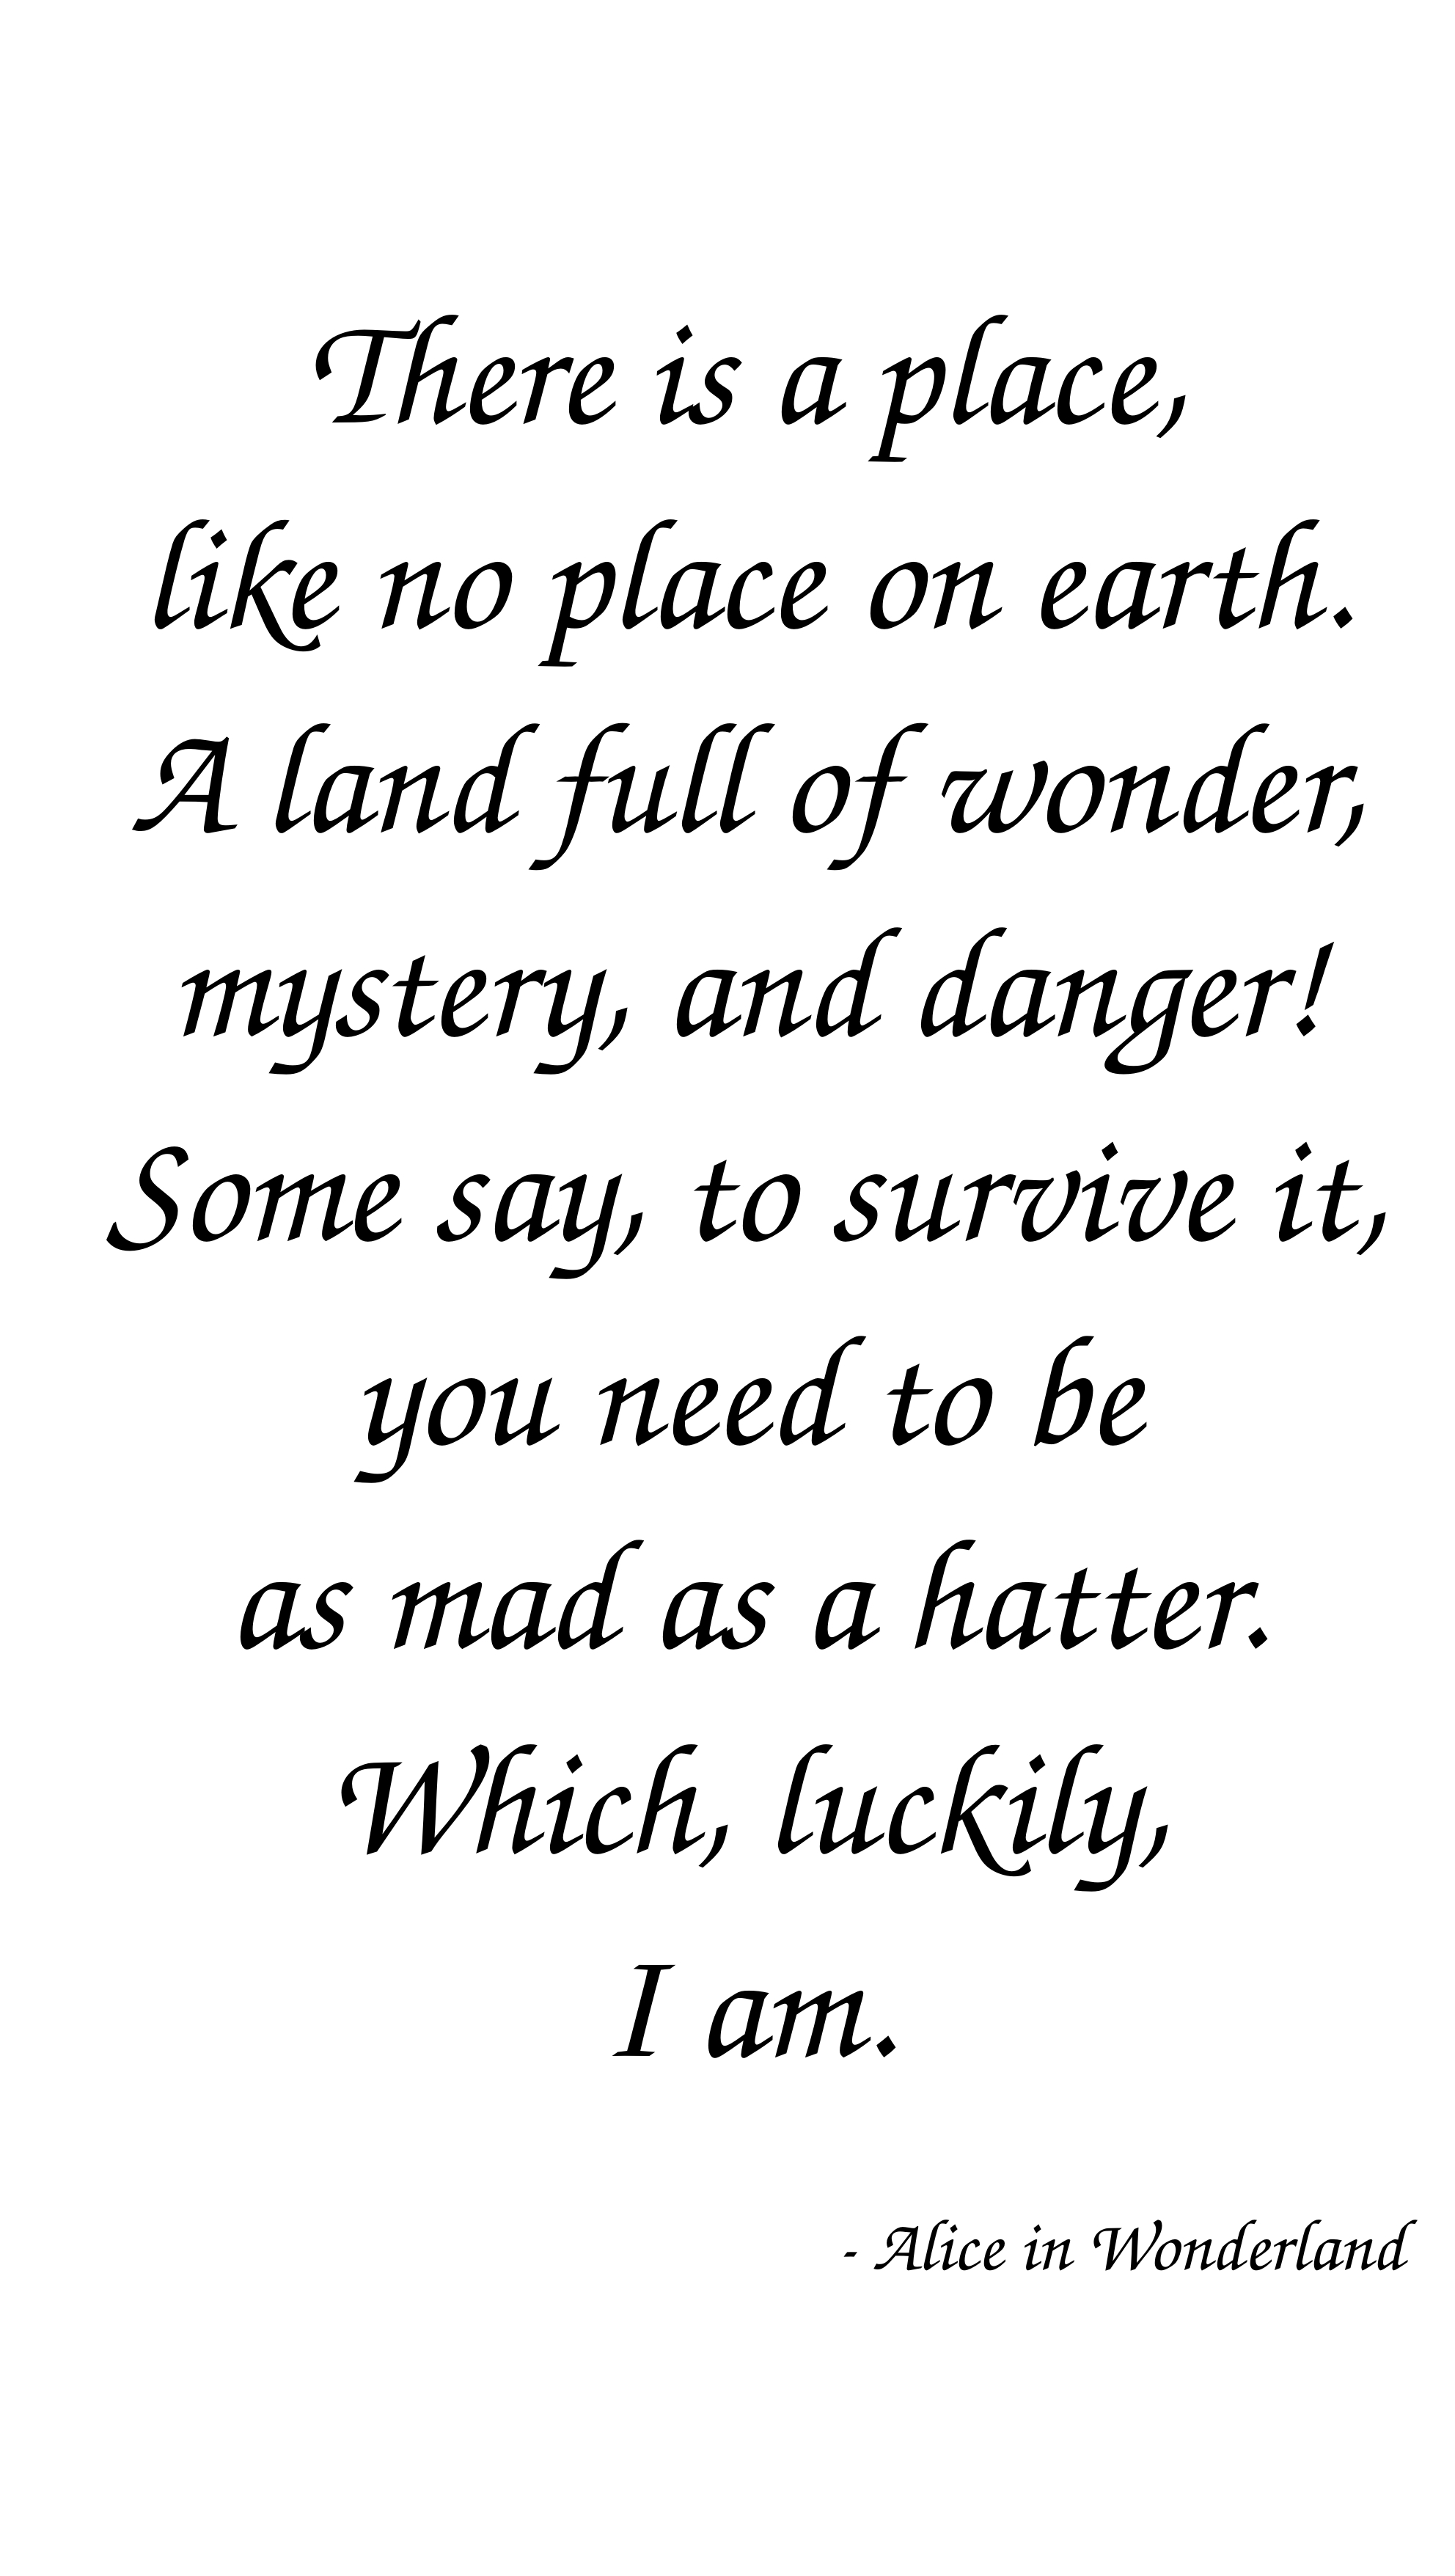 Alice in Wonderland Quote: There is a place, like no place on earth. A land full of wonder, mystery and danger! Some say, to survive it, you need to be as mad as a hatter. Which, luckily, I am.